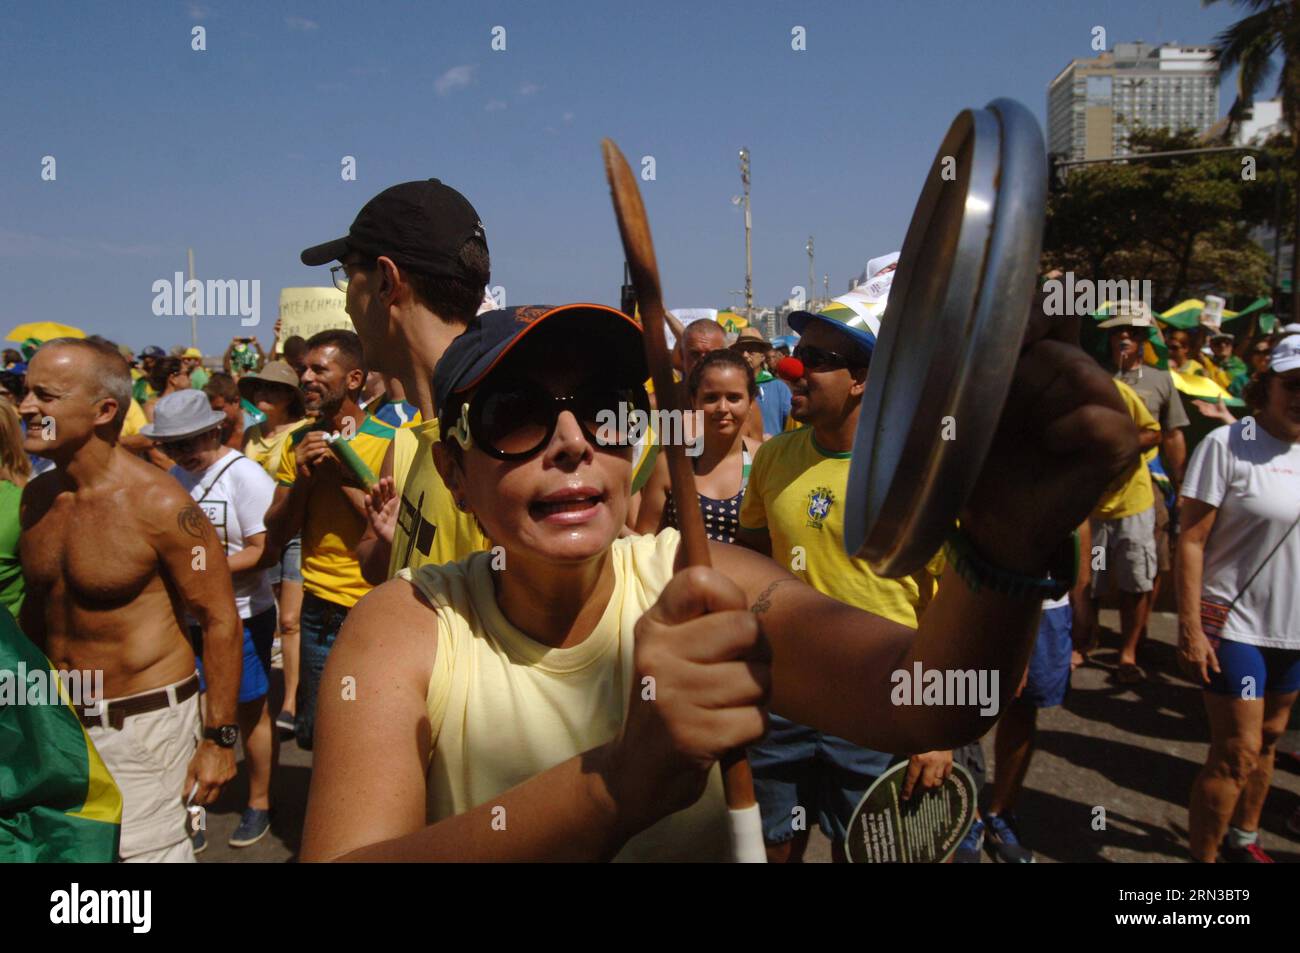 (150412) -- RIO DE JANEIRO, April 12, 2015 -- People take part in a demonstration against the government of Brazilian President Dilma Rousseff after allegations of corruption in the state oil company Petrobras in Rio de Janeiro, Brazil, on April 12, 2015. Alessandro Buzas/AGENCIA ESTADO) (jp) BRAZIL OUT BRAZIL-SAO PAULO-SOCIETY-DEMOSTRATION e AE PUBLICATIONxNOTxINxCHN   Rio de Janeiro April 12 2015 Celebrities Take Part in a Demonstration against The Government of Brazilian President Dilma Rousseff After allegations of Corruption in The State Oil Company Petrobras in Rio de Janeiro Brazil ON A Stock Photo